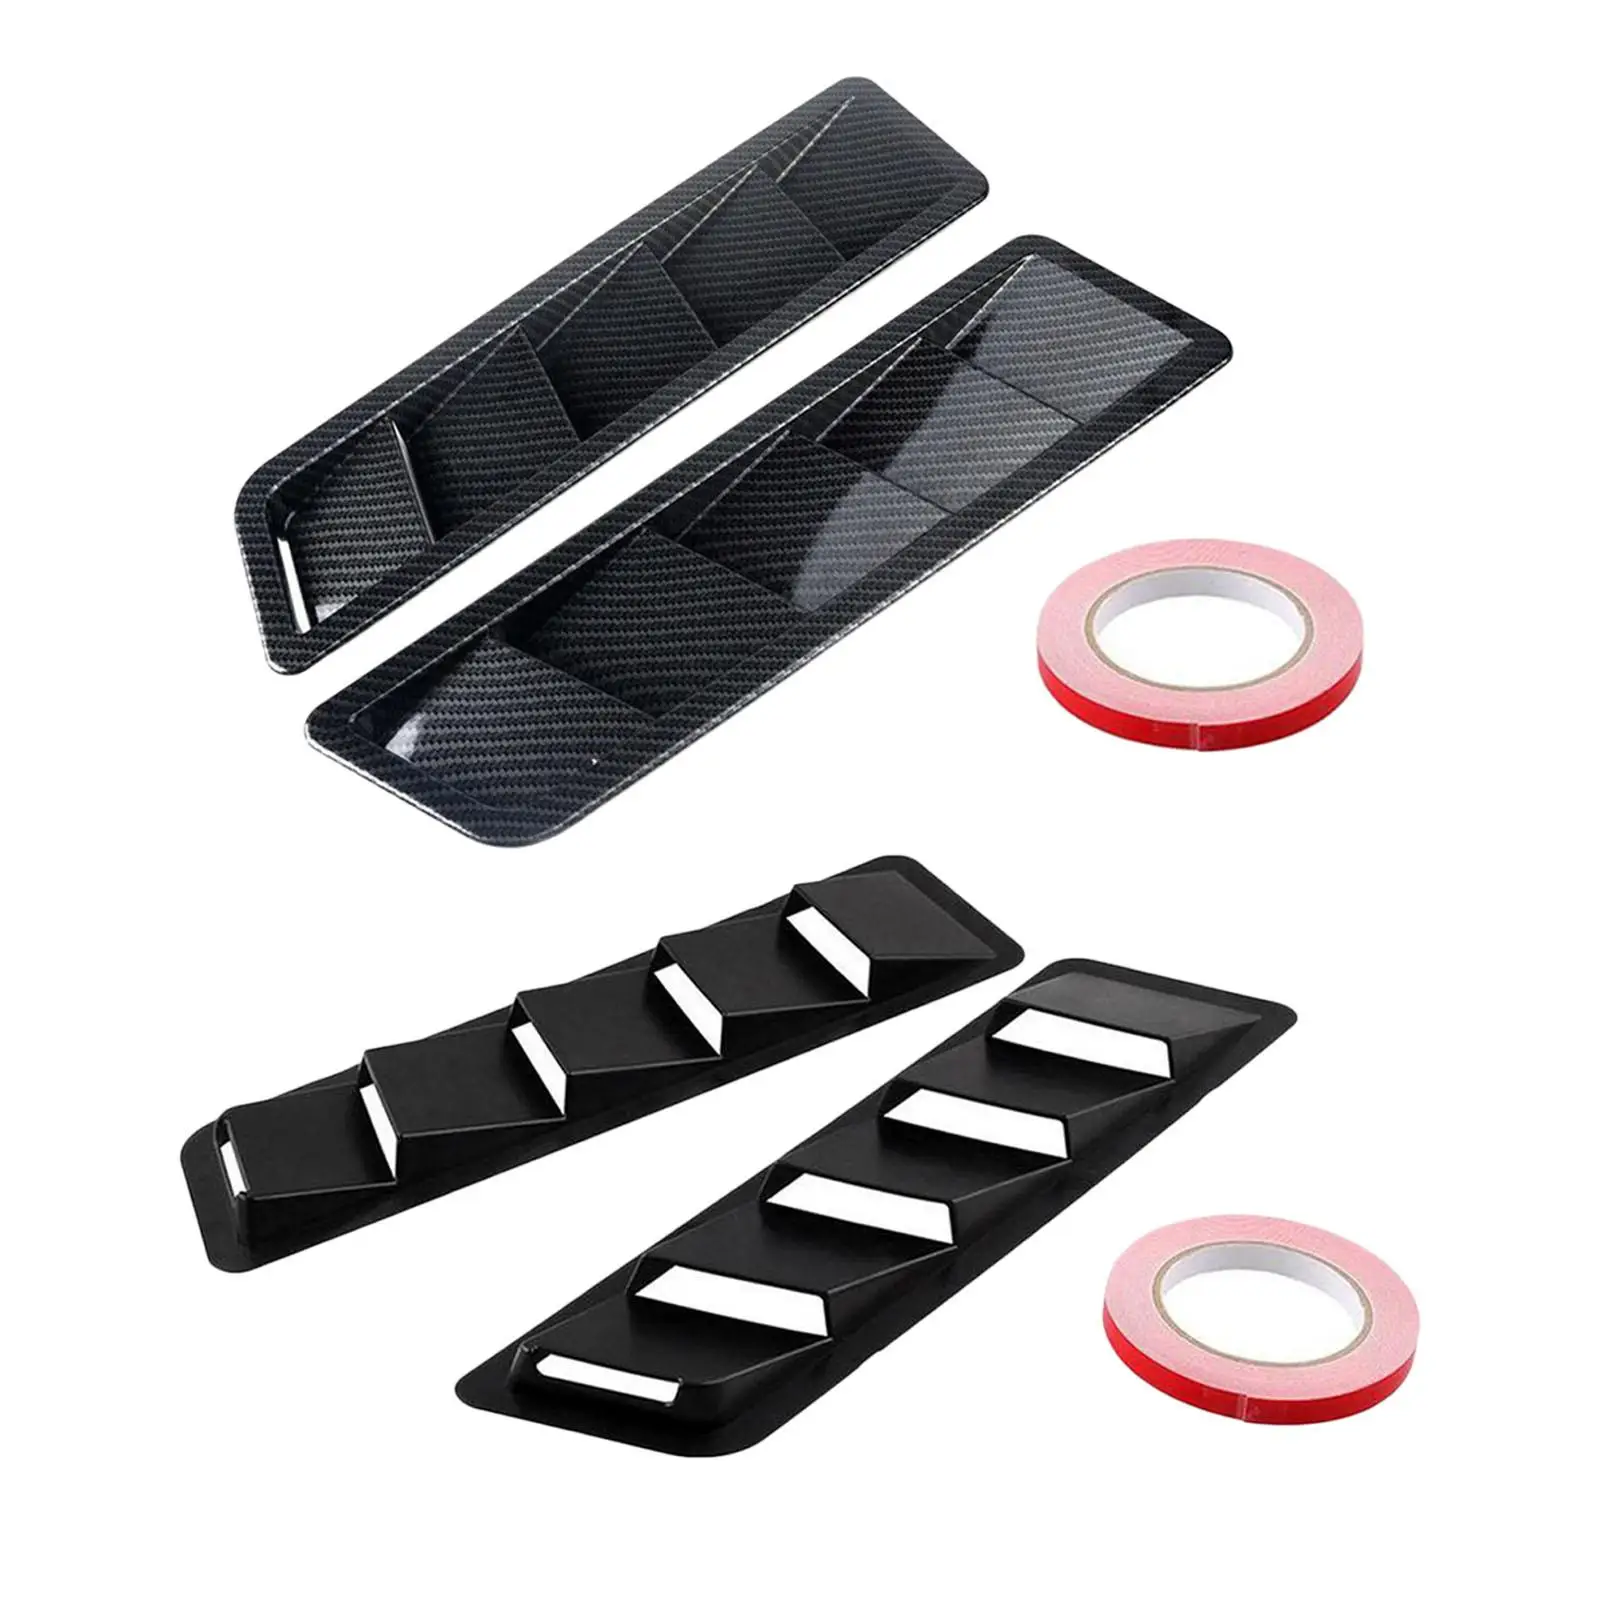 Car Hood Vent Kit Cooling Intakes Cold Louver Universial Auto Hoods Vents Bonnet Cover Intake for Race Car SUV Decorative